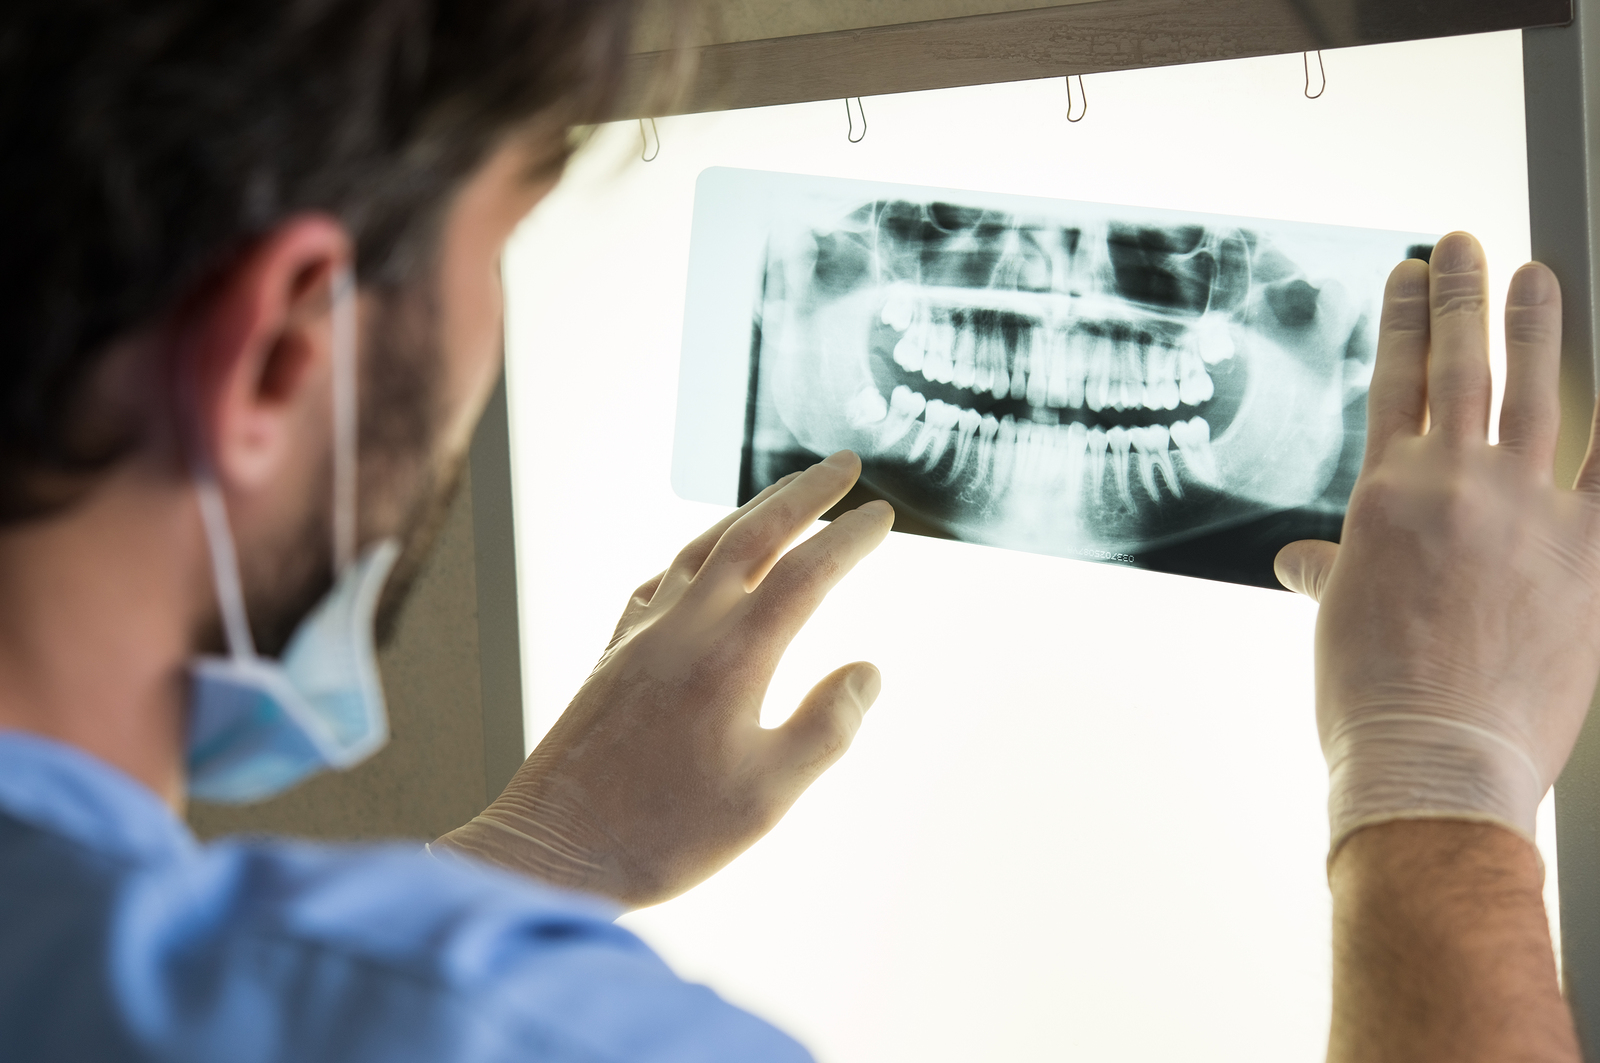 If your dentist discovers any issues, they will discuss your treatment options with you